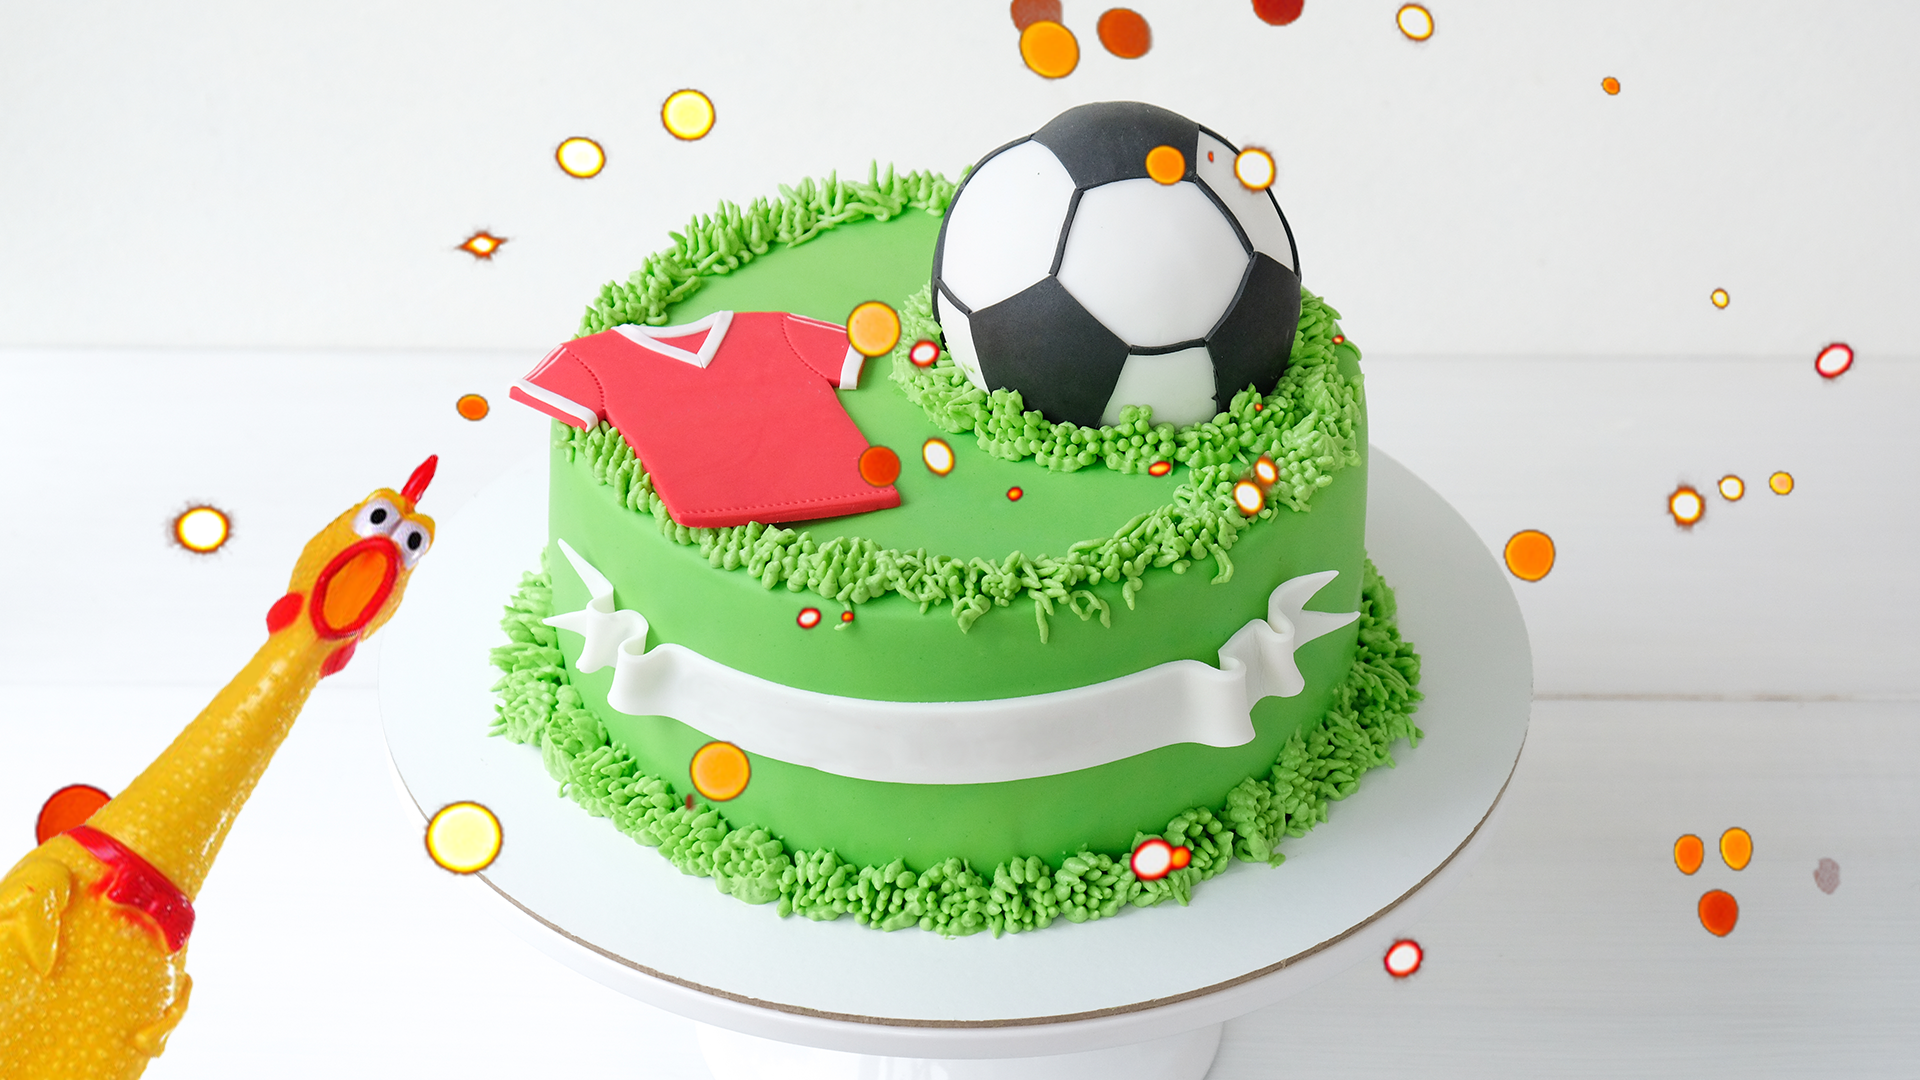 Football cake and rubber chicken